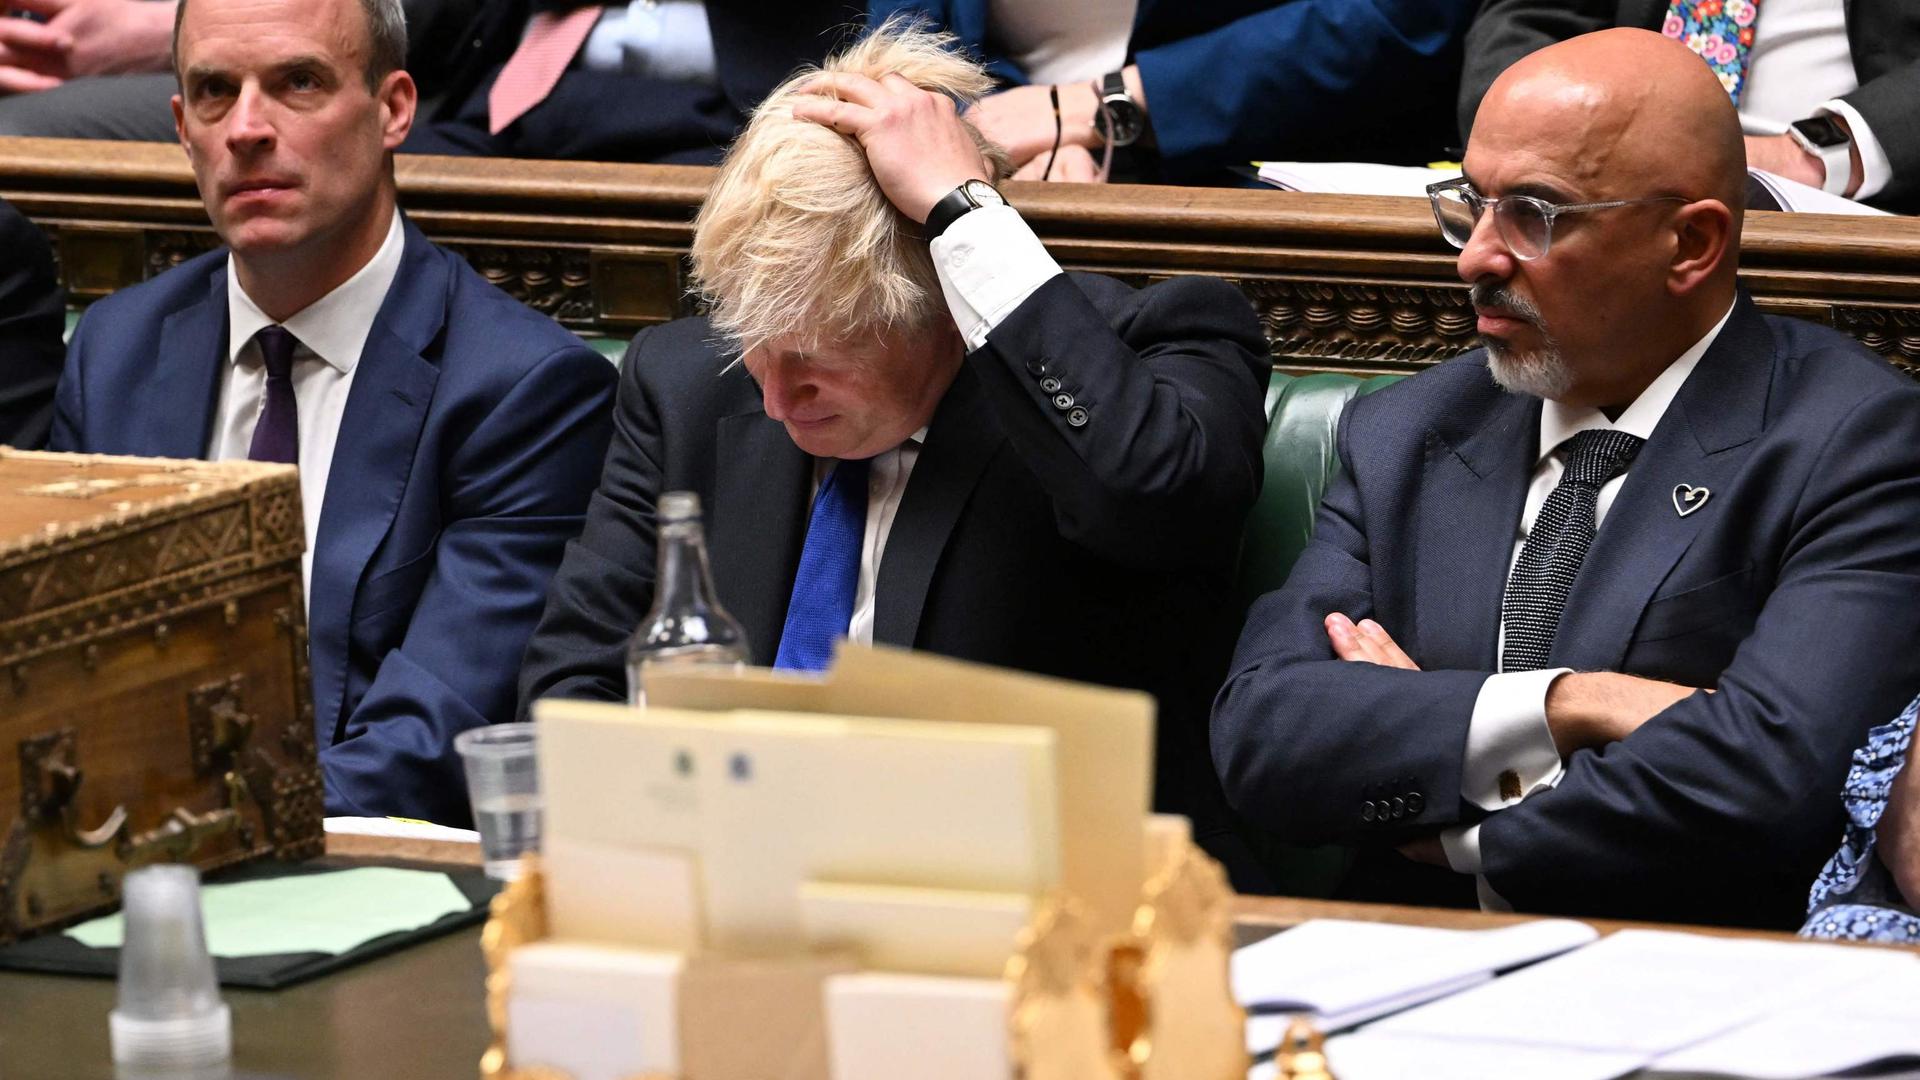 Boris Johnson flanked by Justice Secretary Dominic Raab (L) and Britain's new Chancellor of the Exchequer Nadhim Zahawi (R) during prime minister's questions on July 6, 2022